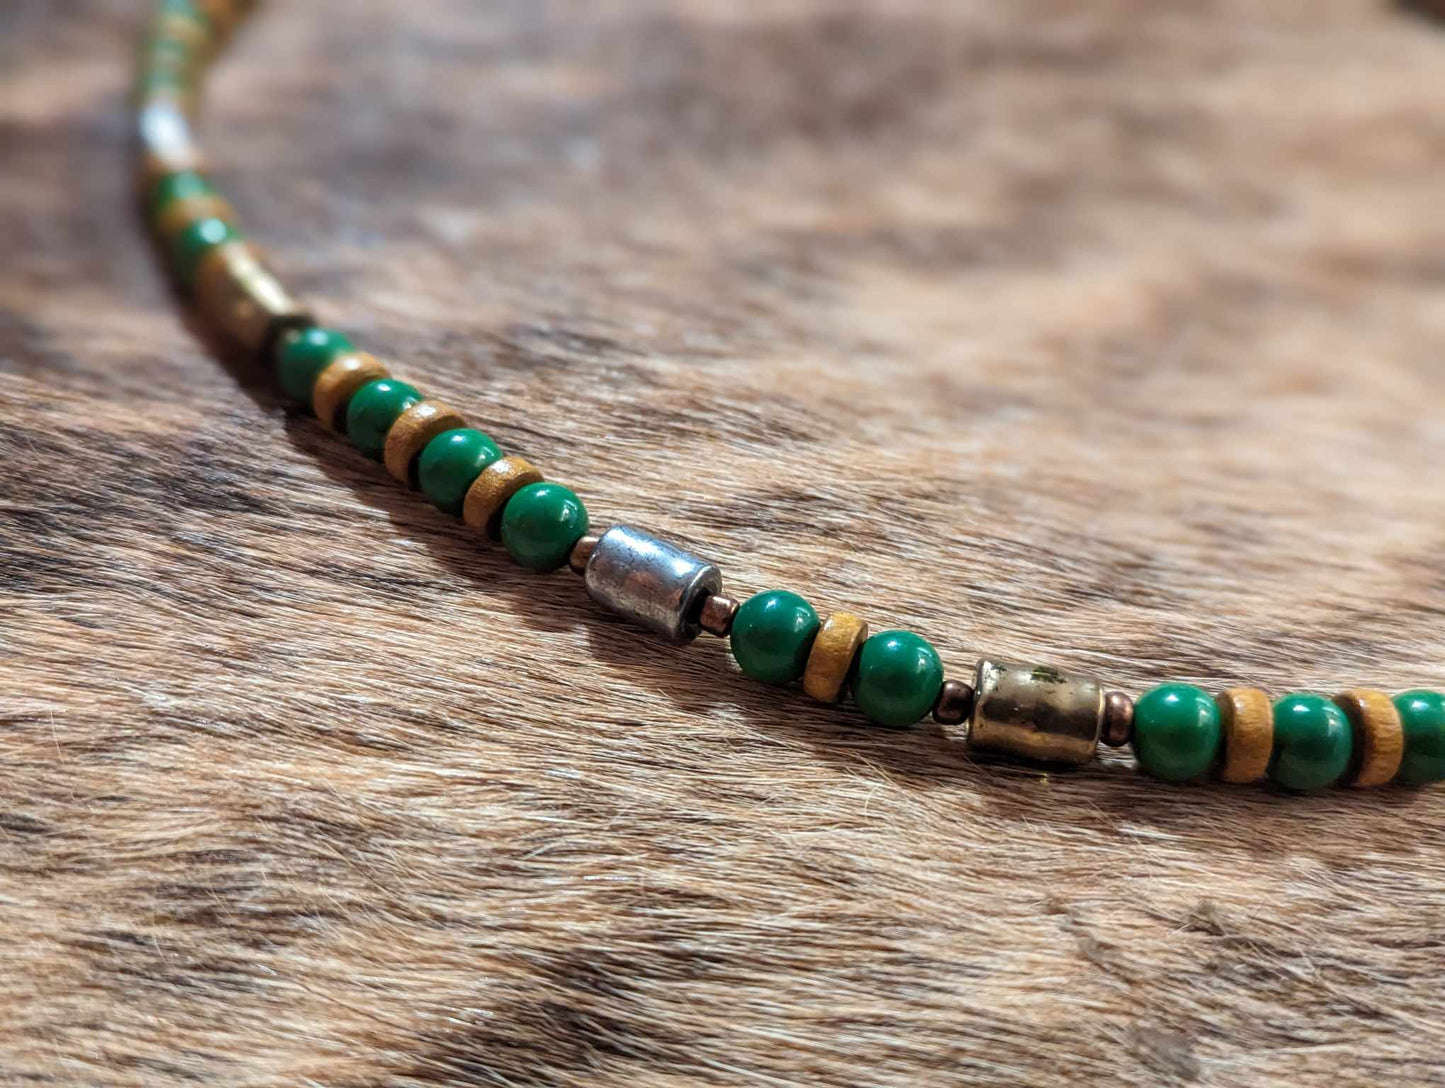 Wood, Green Glass and Metal Beaded Peacock Feather Necklace